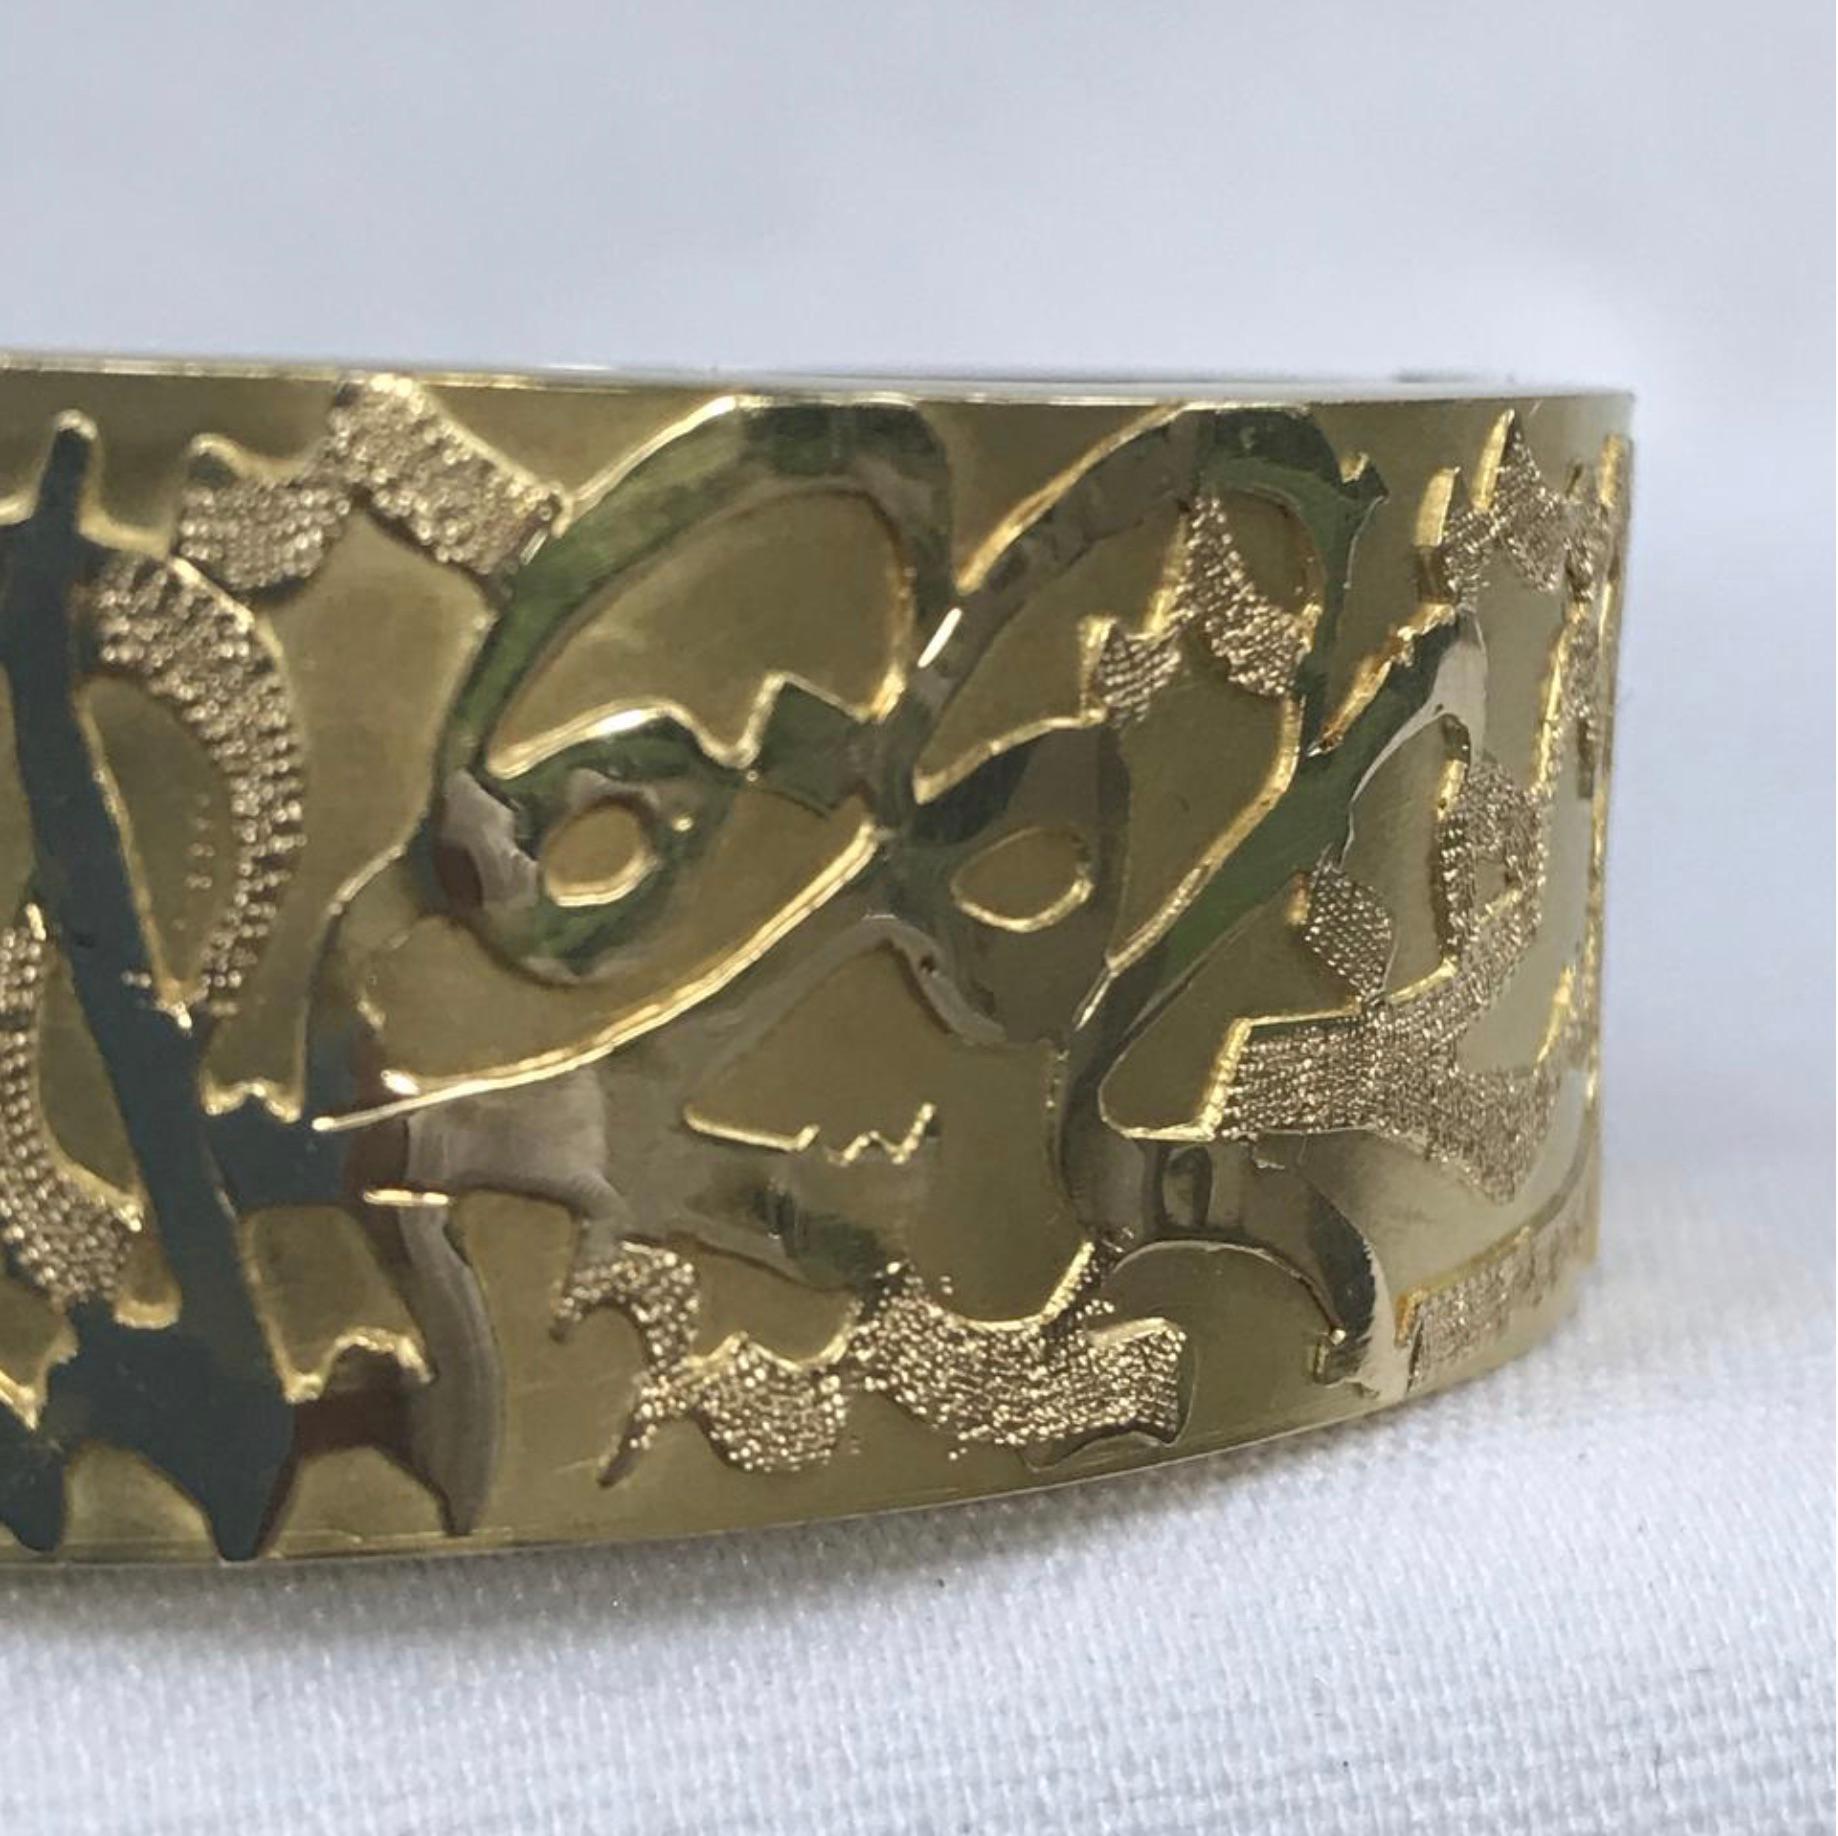 BRAND - Custom Made in Cairo Egypt

CONDITION - Exceptional!

SKU - 1365

ORIGINAL RETAIL - $7,000 + tax

DIMENSIONS - 2.6 x .9 x 2.25, 57.7 grams or 2.04 oz

CLOSURE TYPE - Clasp

MATERIAL - Gold - 18k - tested for purity, authentication can be